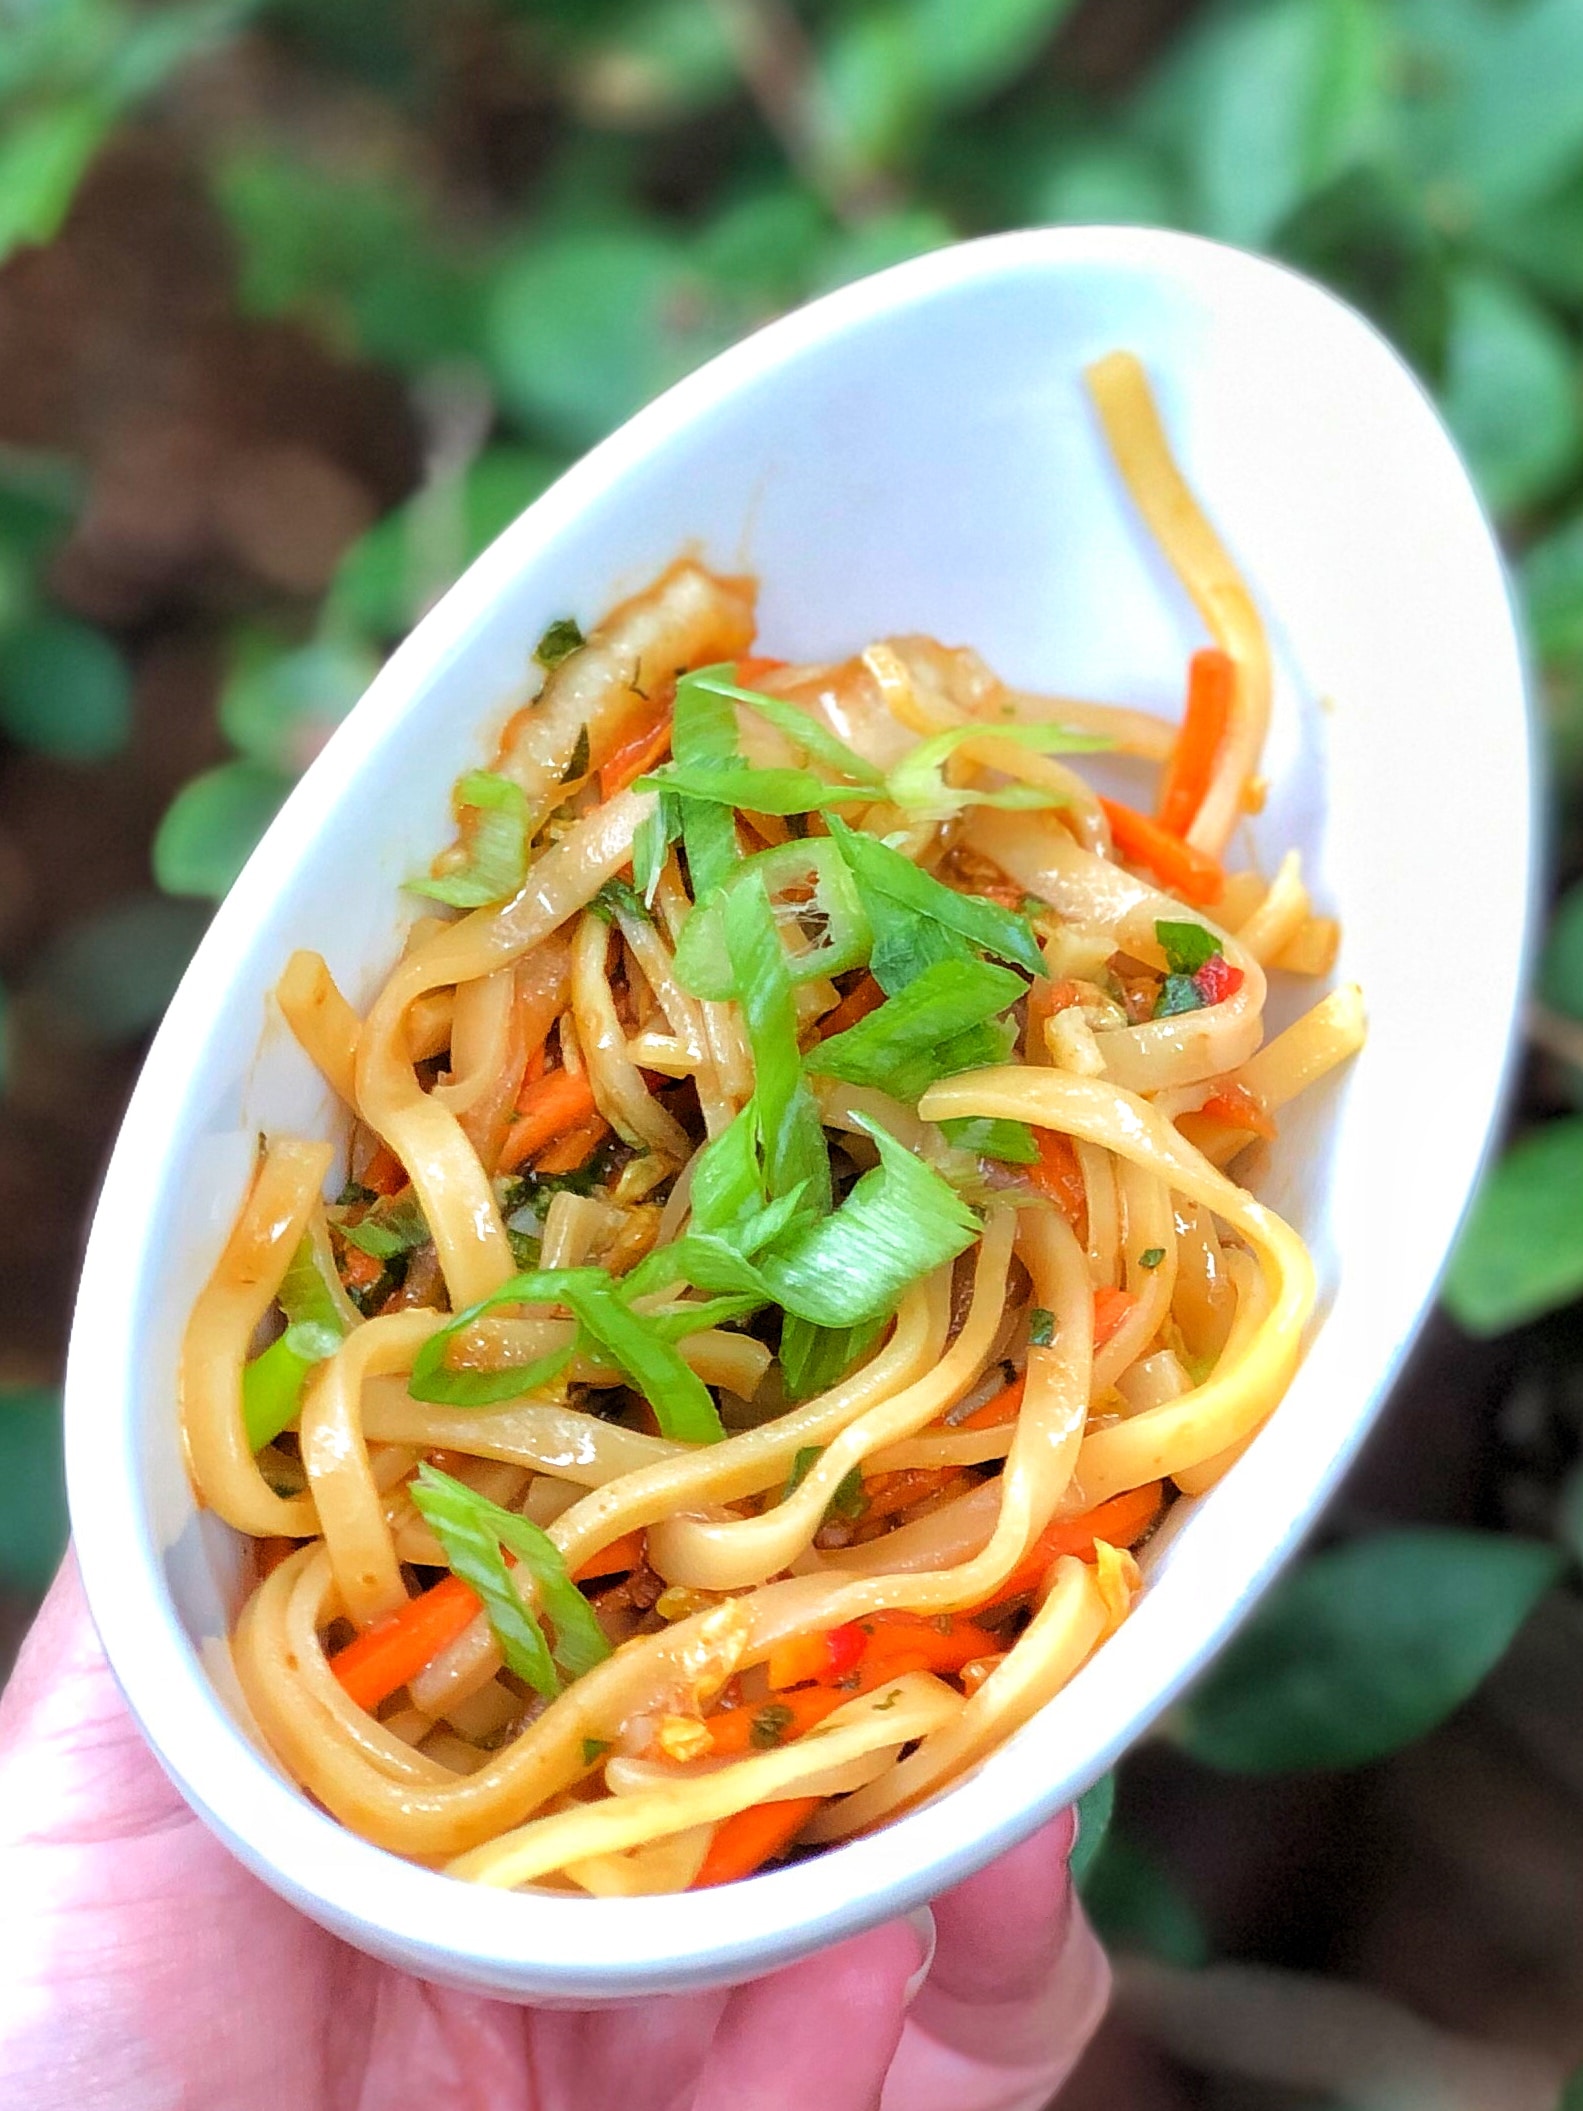 Vegan Cold Noodle Salad at the Epcot Food and Wine Festival